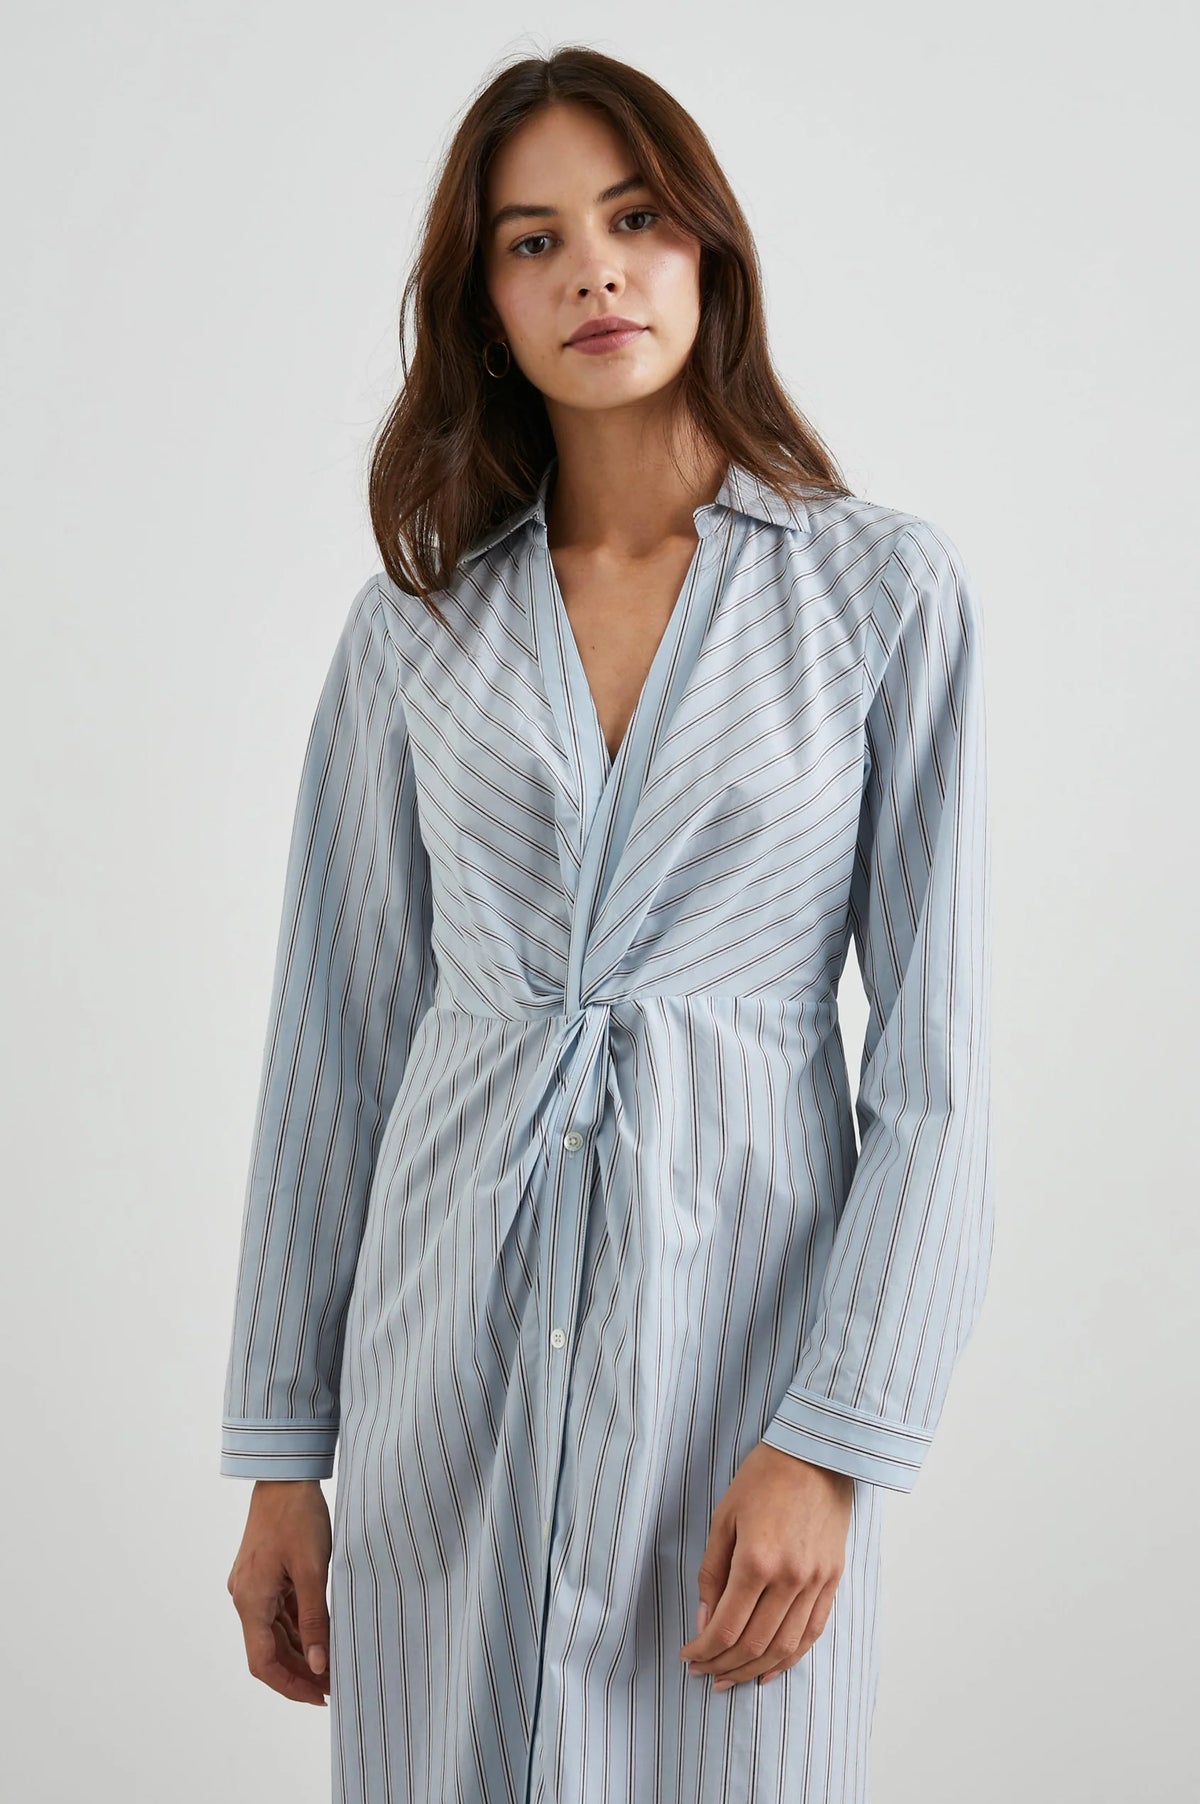 Light blue midi shirt dress with stripes, side splits and gathering detail at the centre waist with a V neck and classic collar